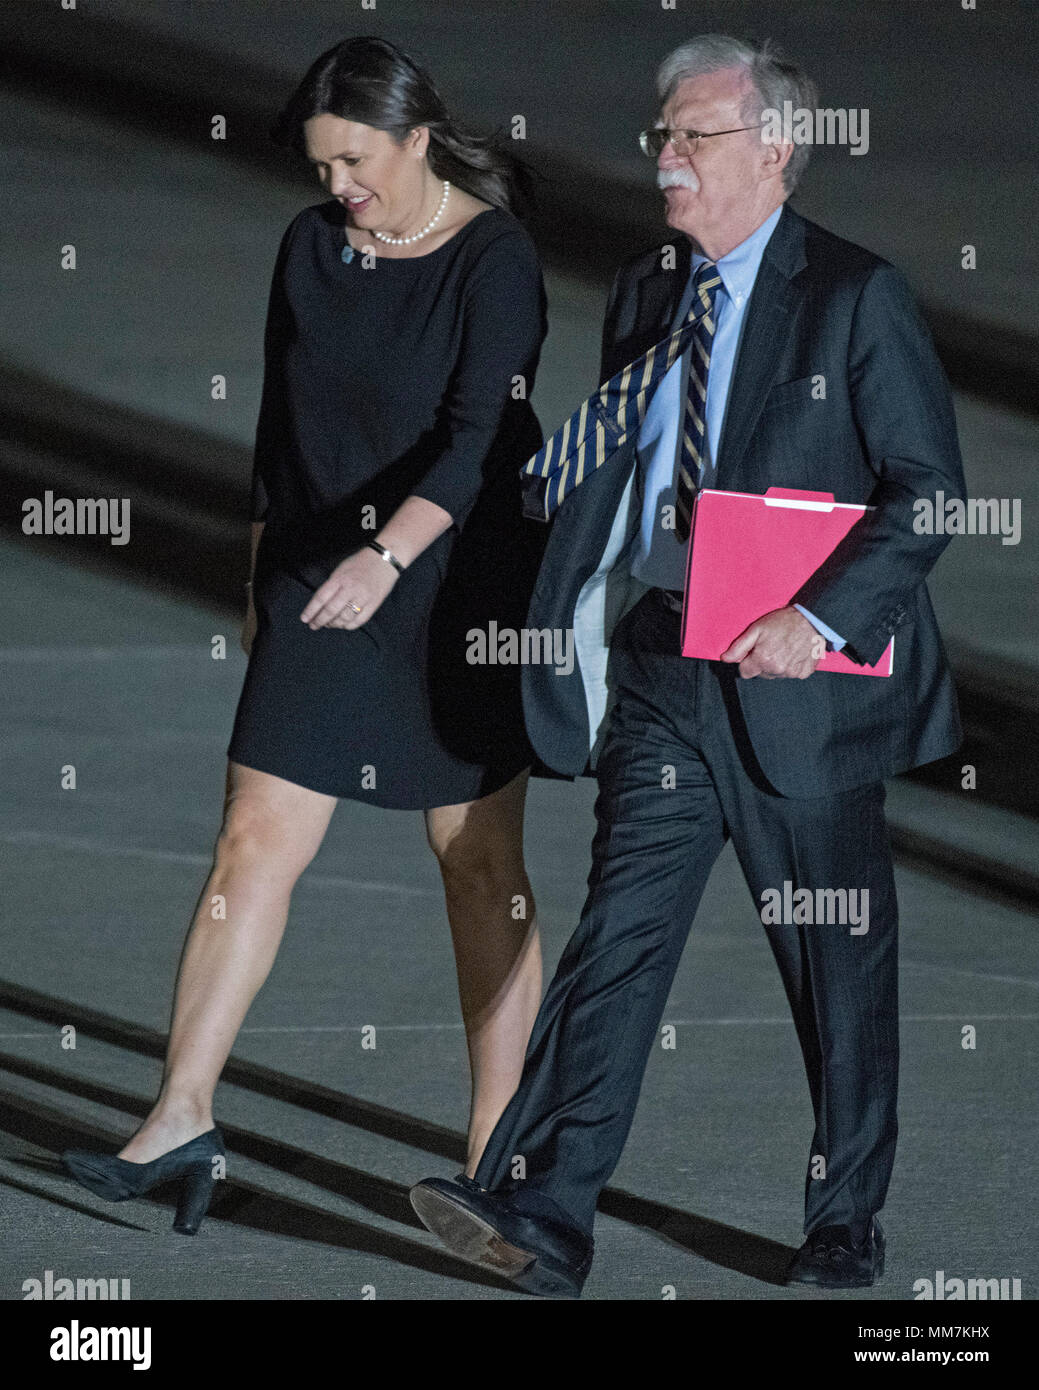 White House Press Secretary Sarah Sanders and National Security Advisor  John Bolton walk across the tarmac after accompanying United States  President Donald J. Trump to Joint Base Andrews in Maryland where he